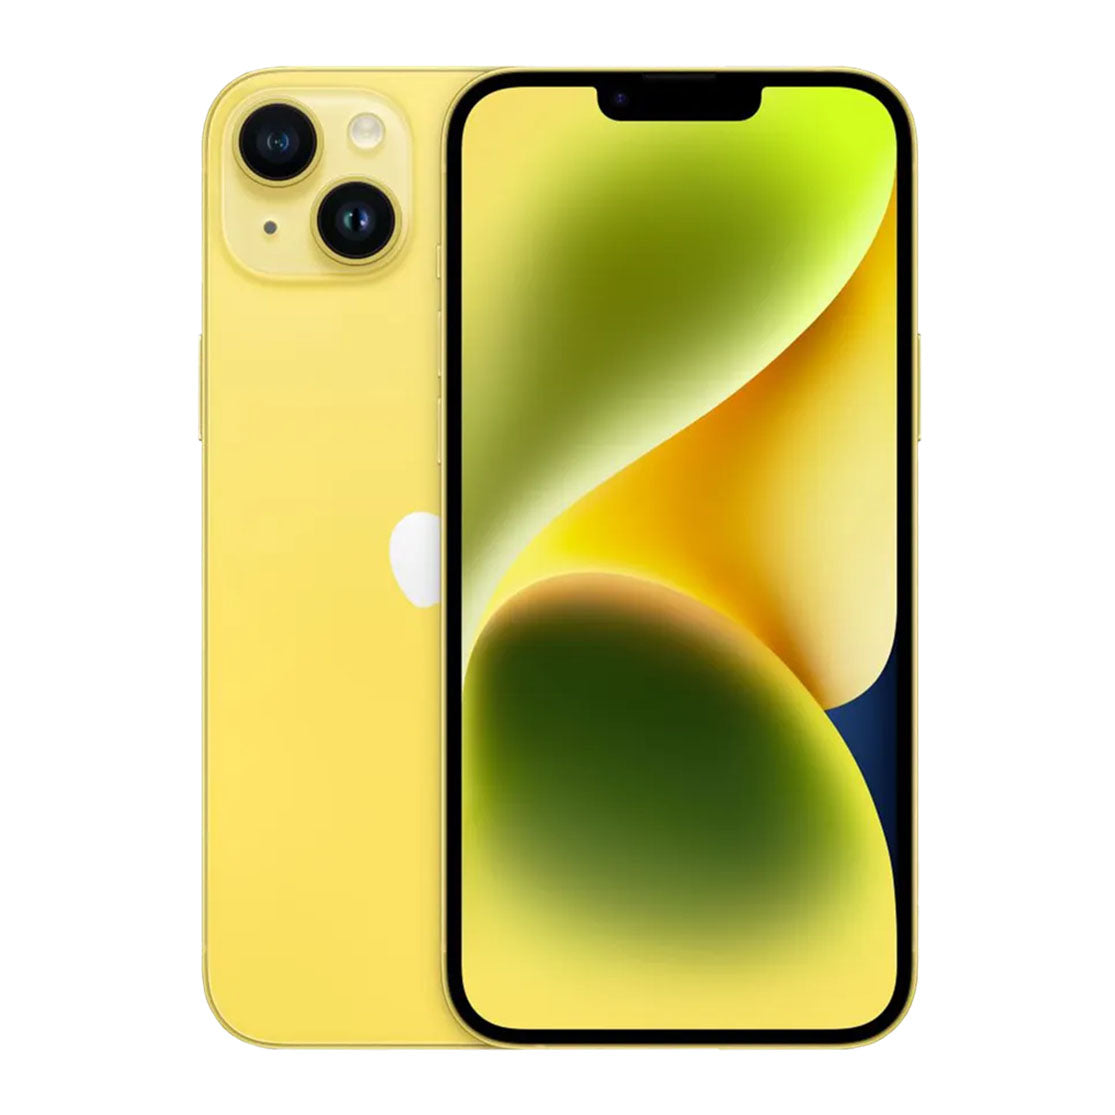 Apple iPhone 14 | A15 Bionic chip | Crash Detection Yellow